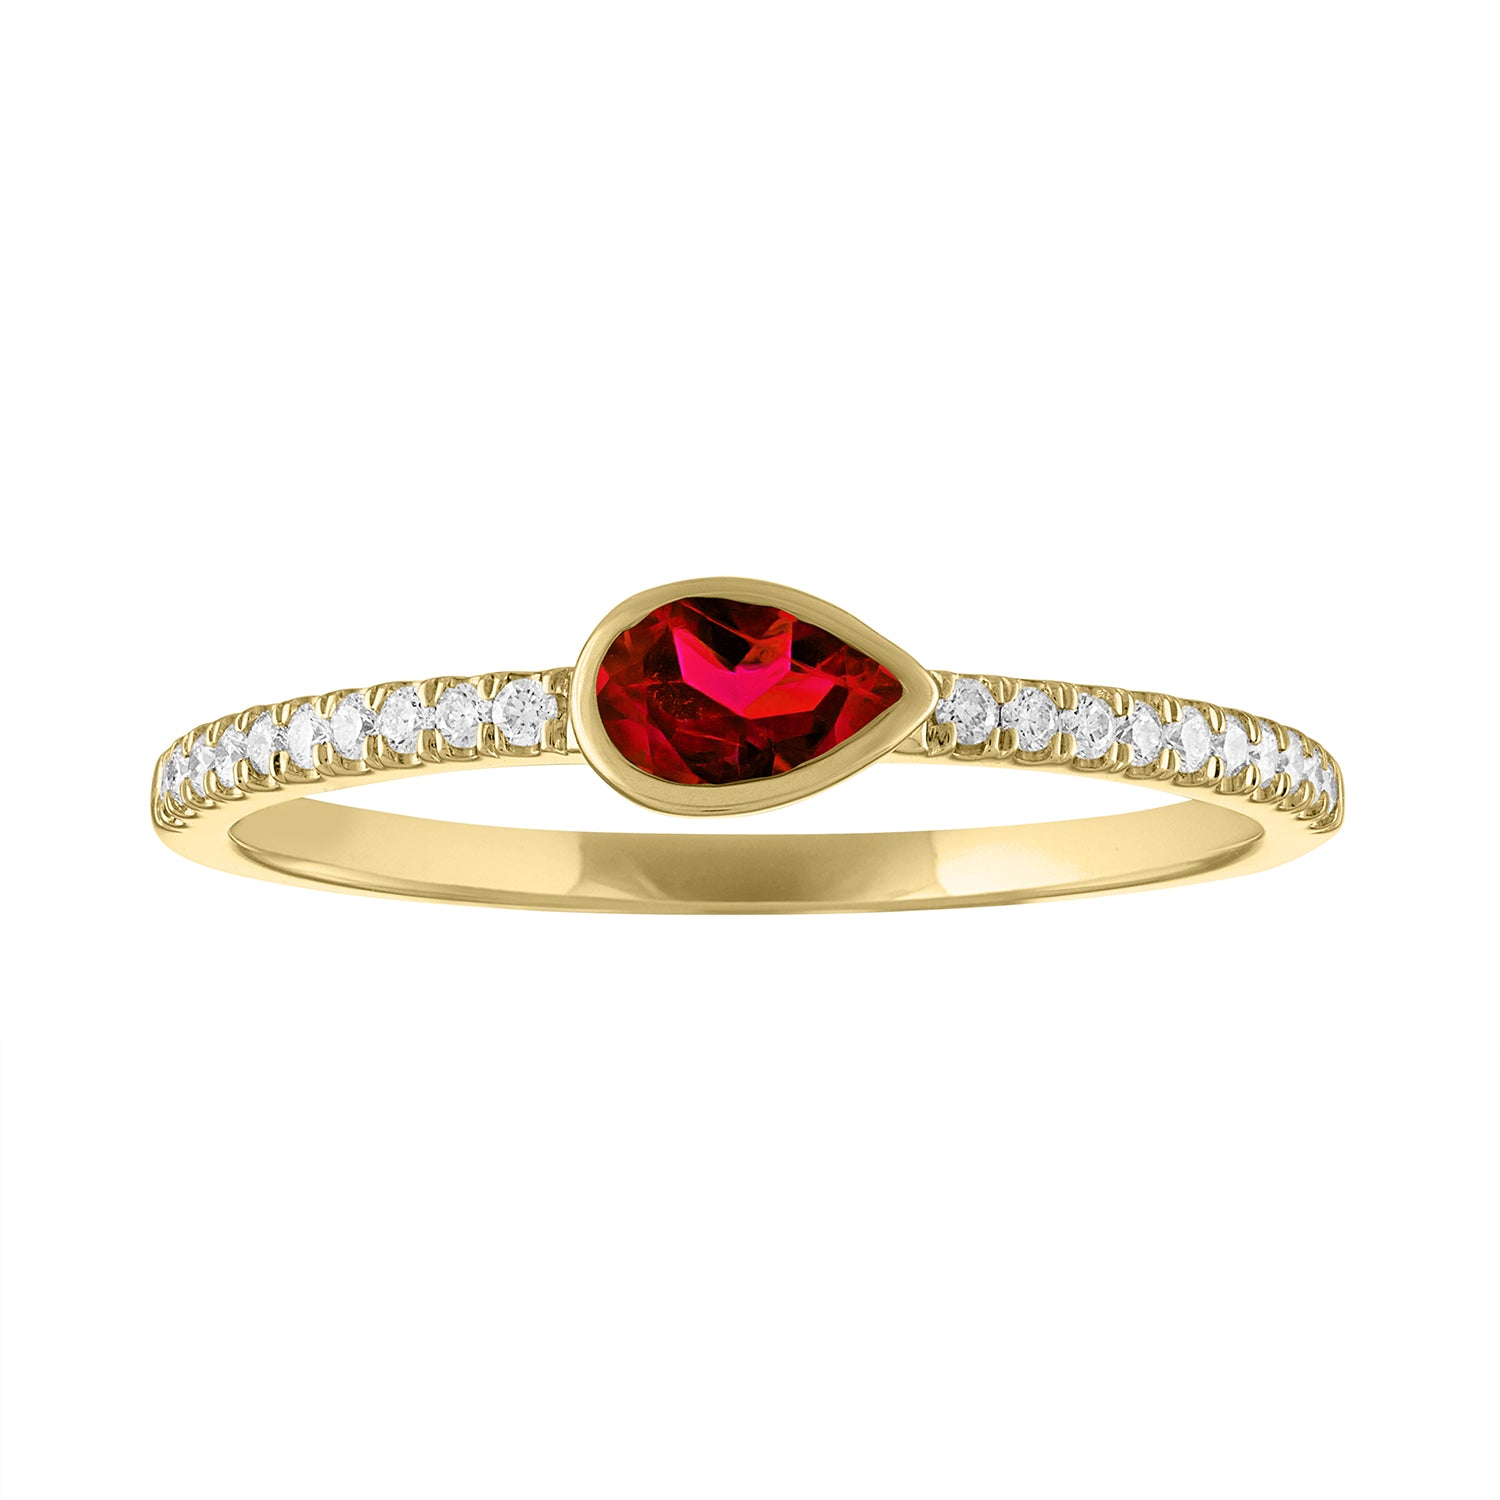 Yellow gold skinny band with a bezeled pear shape garnet in the center and round diamonds on the shank. 